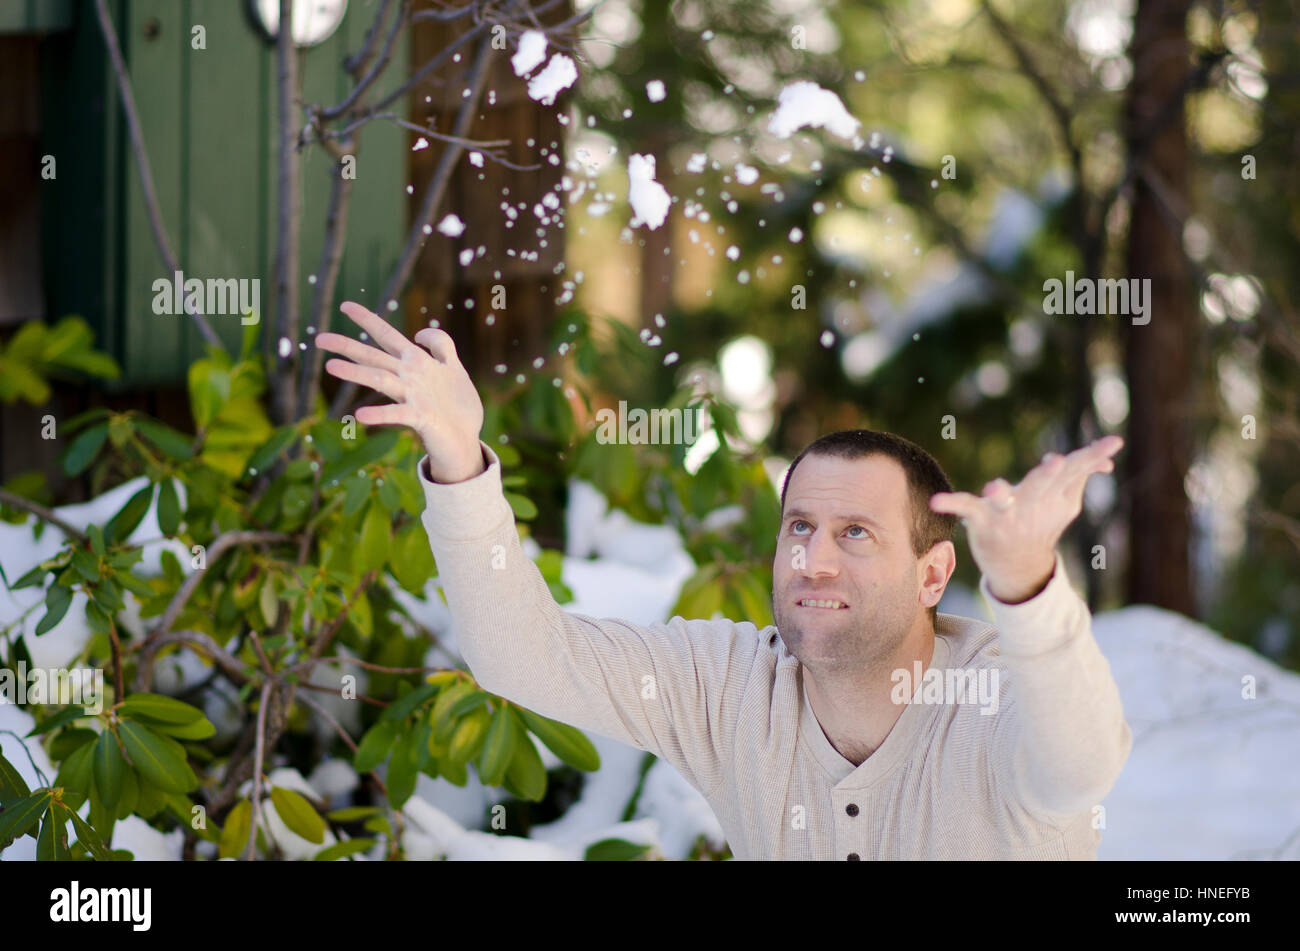 Adult man playing in the snow throwing the snow up in the air. Stock Photo